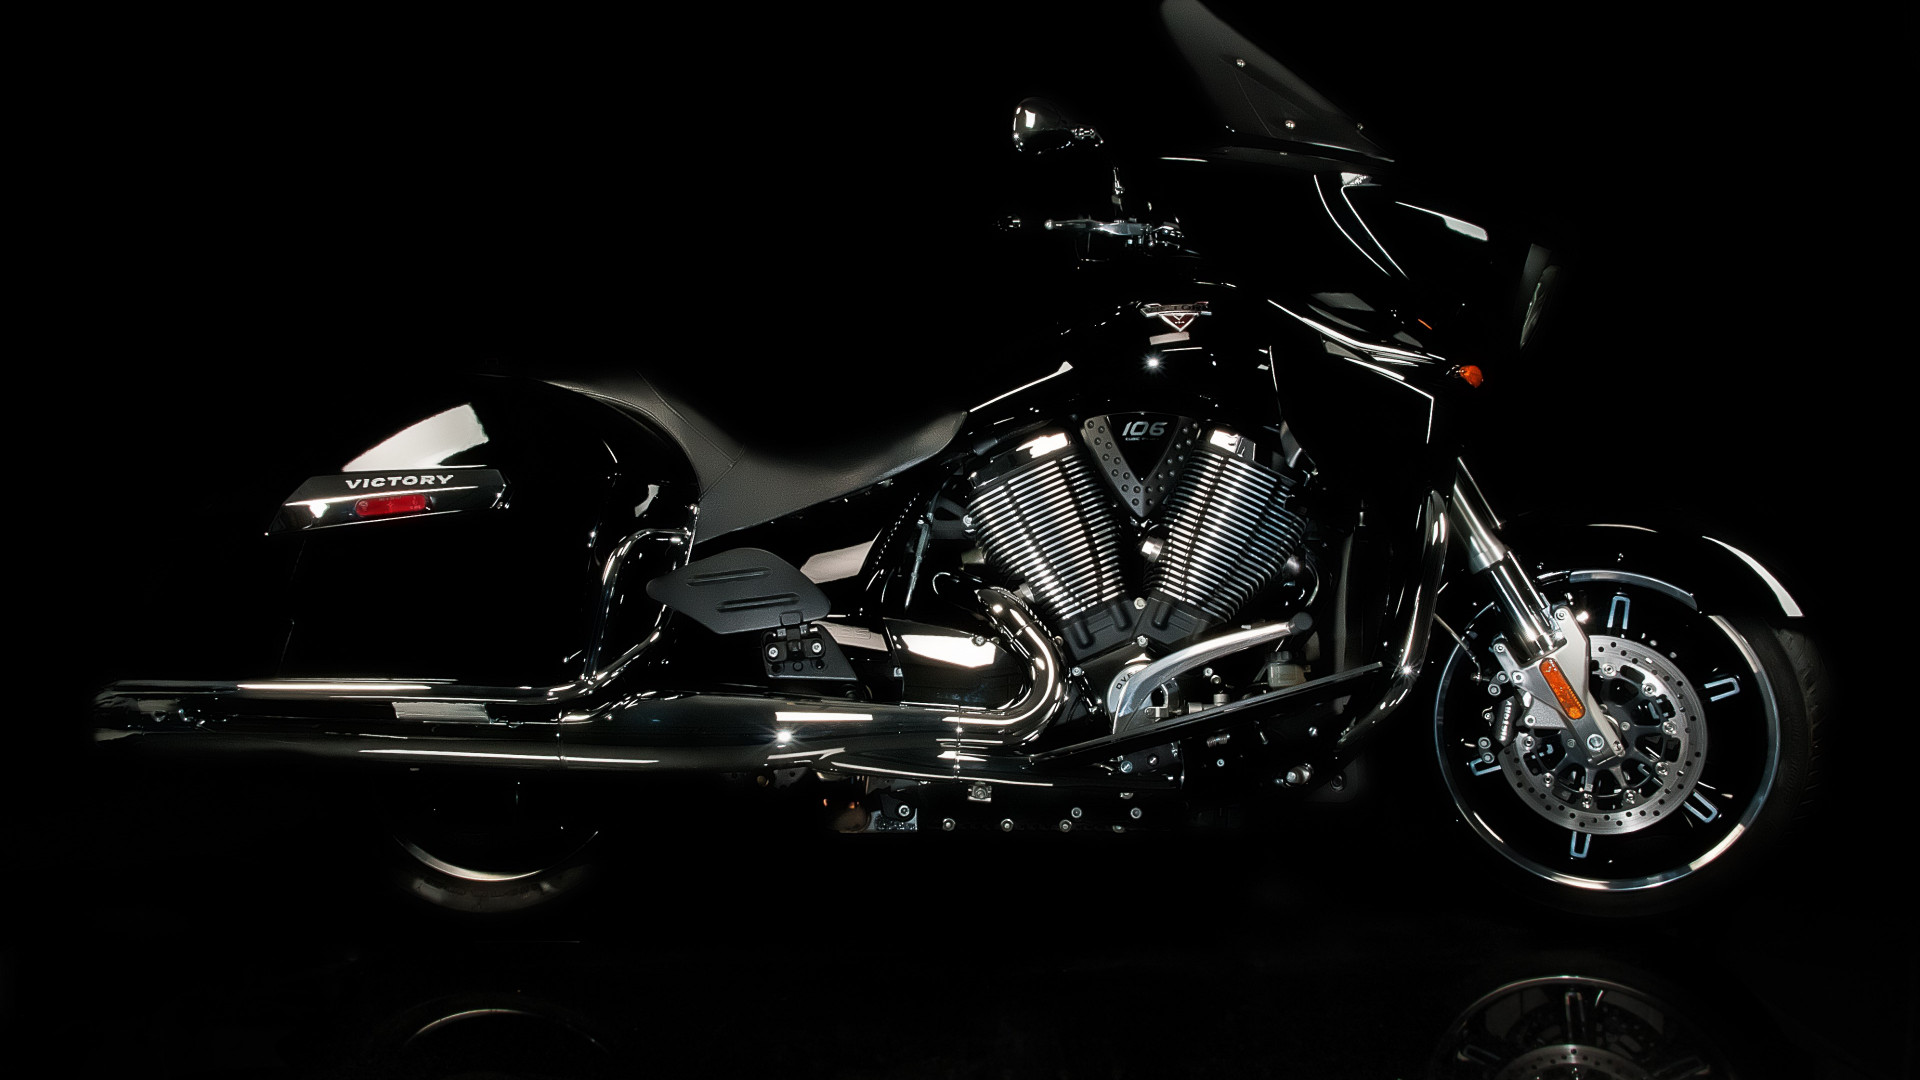 Victory motorcycle wallpaper 1920x1080